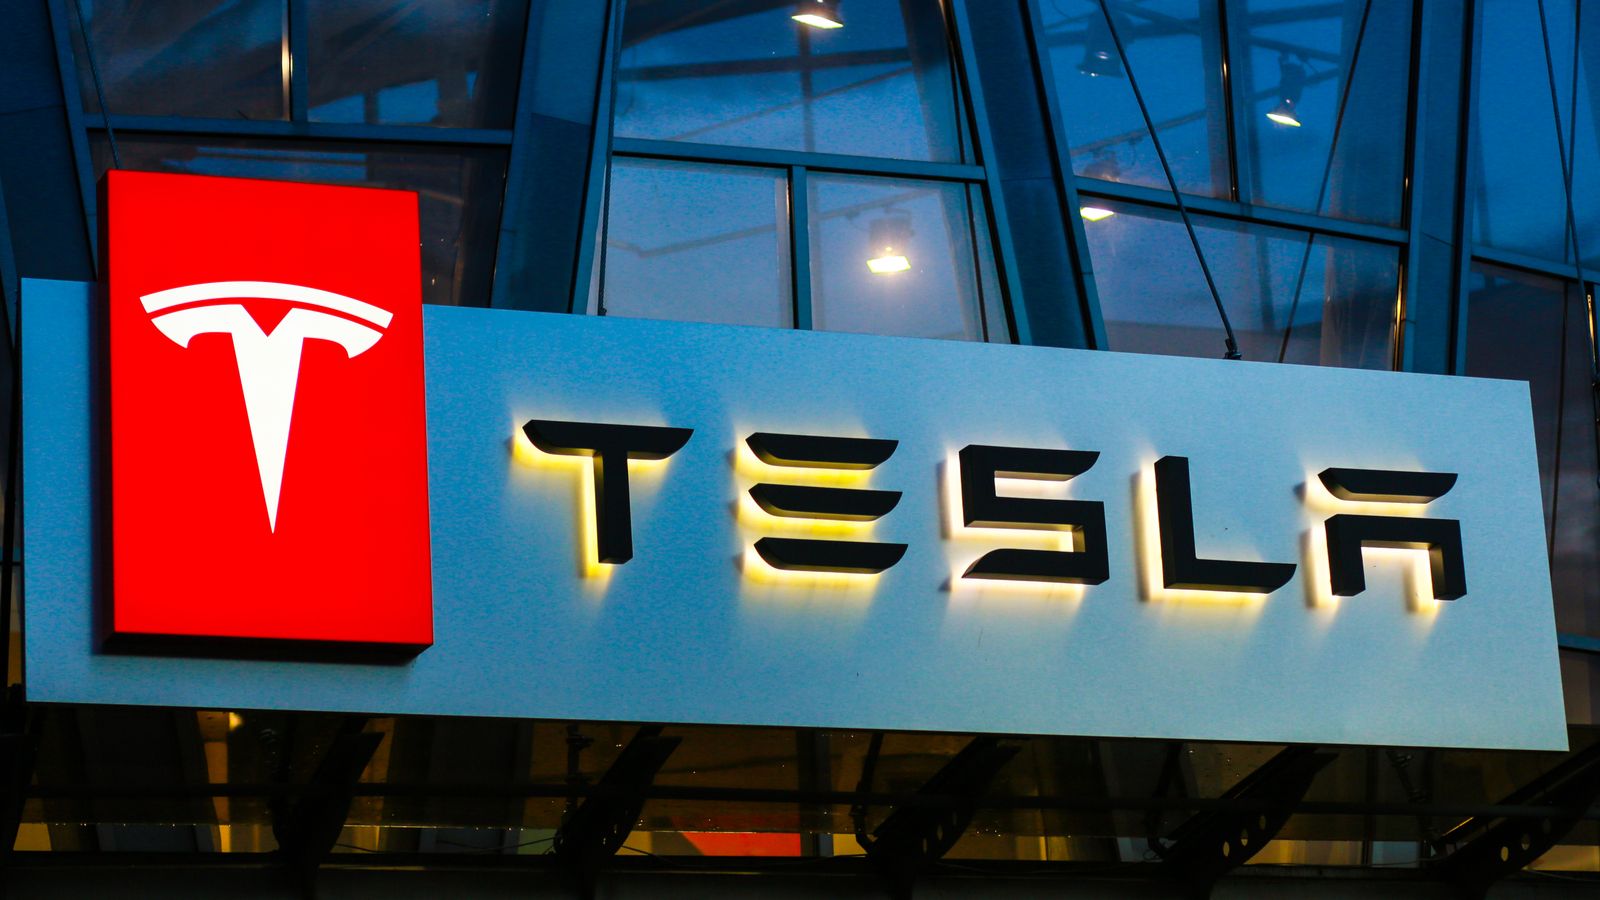 Giving Up On Tesla? 3 Better Ways to Invest in EV Stocks